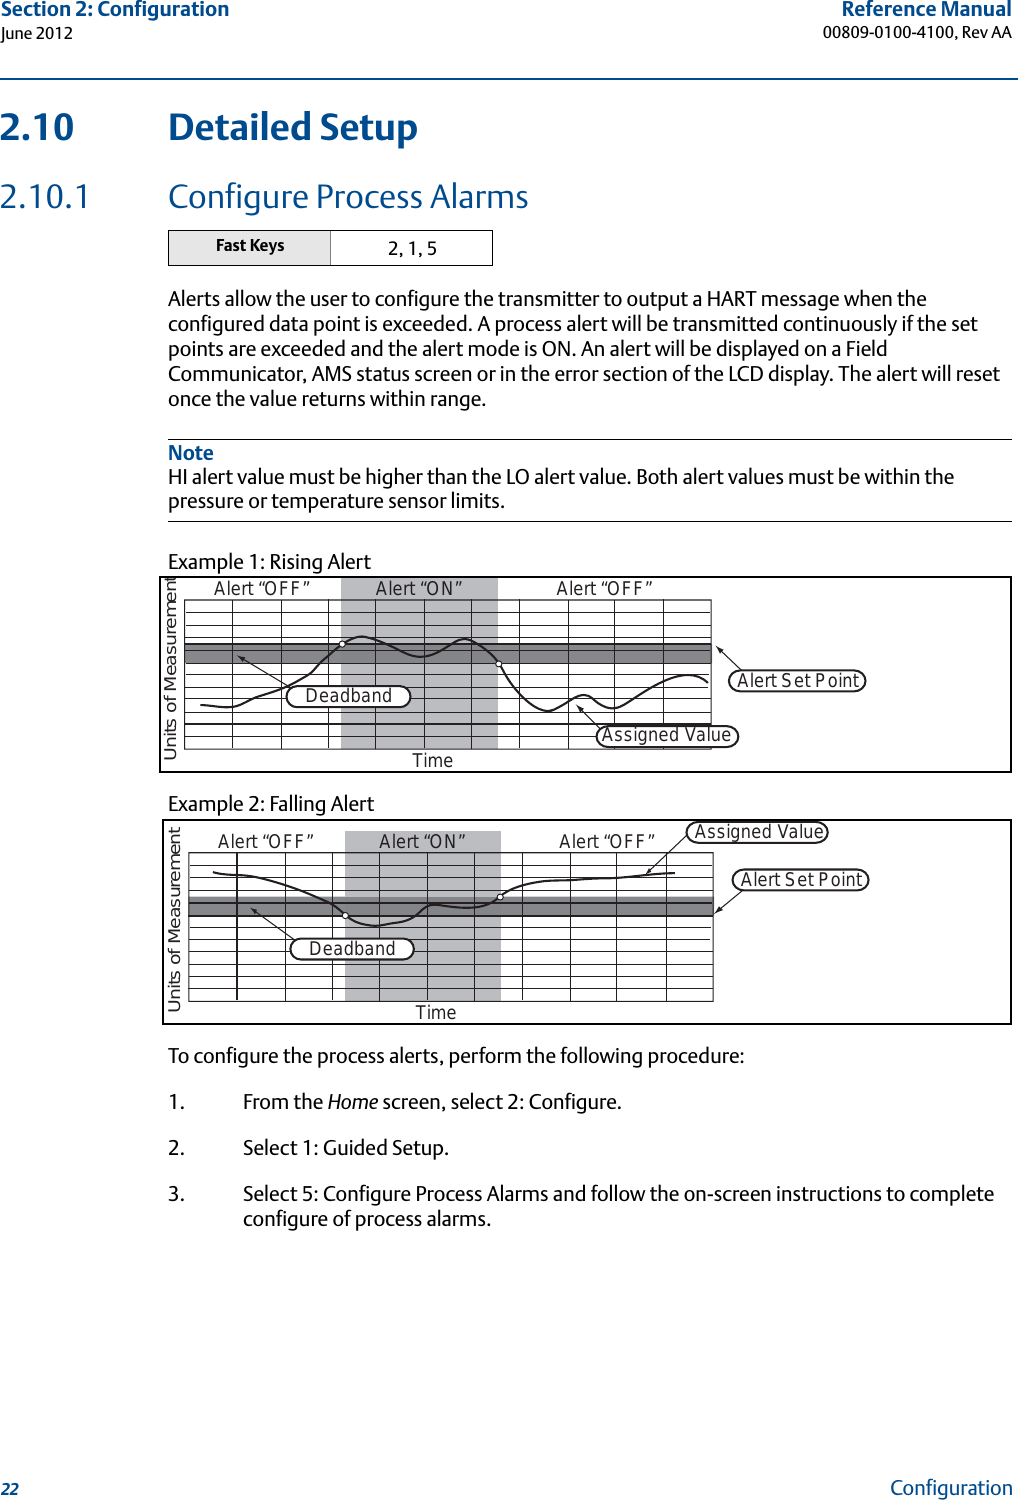 22Reference Manual00809-0100-4100, Rev AASection 2: ConfigurationJune 2012Configuration2.10 Detailed Setup2.10.1 Configure Process AlarmsAlerts allow the user to configure the transmitter to output a HART message when the configured data point is exceeded. A process alert will be transmitted continuously if the set points are exceeded and the alert mode is ON. An alert will be displayed on a Field Communicator, AMS status screen or in the error section of the LCD display. The alert will reset once the value returns within range.NoteHI alert value must be higher than the LO alert value. Both alert values must be within the pressure or temperature sensor limits.Example 1: Rising AlertExample 2: Falling AlertTo configure the process alerts, perform the following procedure:1. From the Home screen, select 2: Configure.2. Select 1: Guided Setup.3. Select 5: Configure Process Alarms and follow the on-screen instructions to complete configure of process alarms.Fast Keys 2, 1, 5DeadbandAssigned ValueAlert Set PointAlert “OFF” Alert “ON” Alert “OFF”Units of MeasurementTimeDeadbandAssigned ValueAlert Set PointAlert “OFF” Alert “ON” Alert “OFF”Units of MeasurementTime